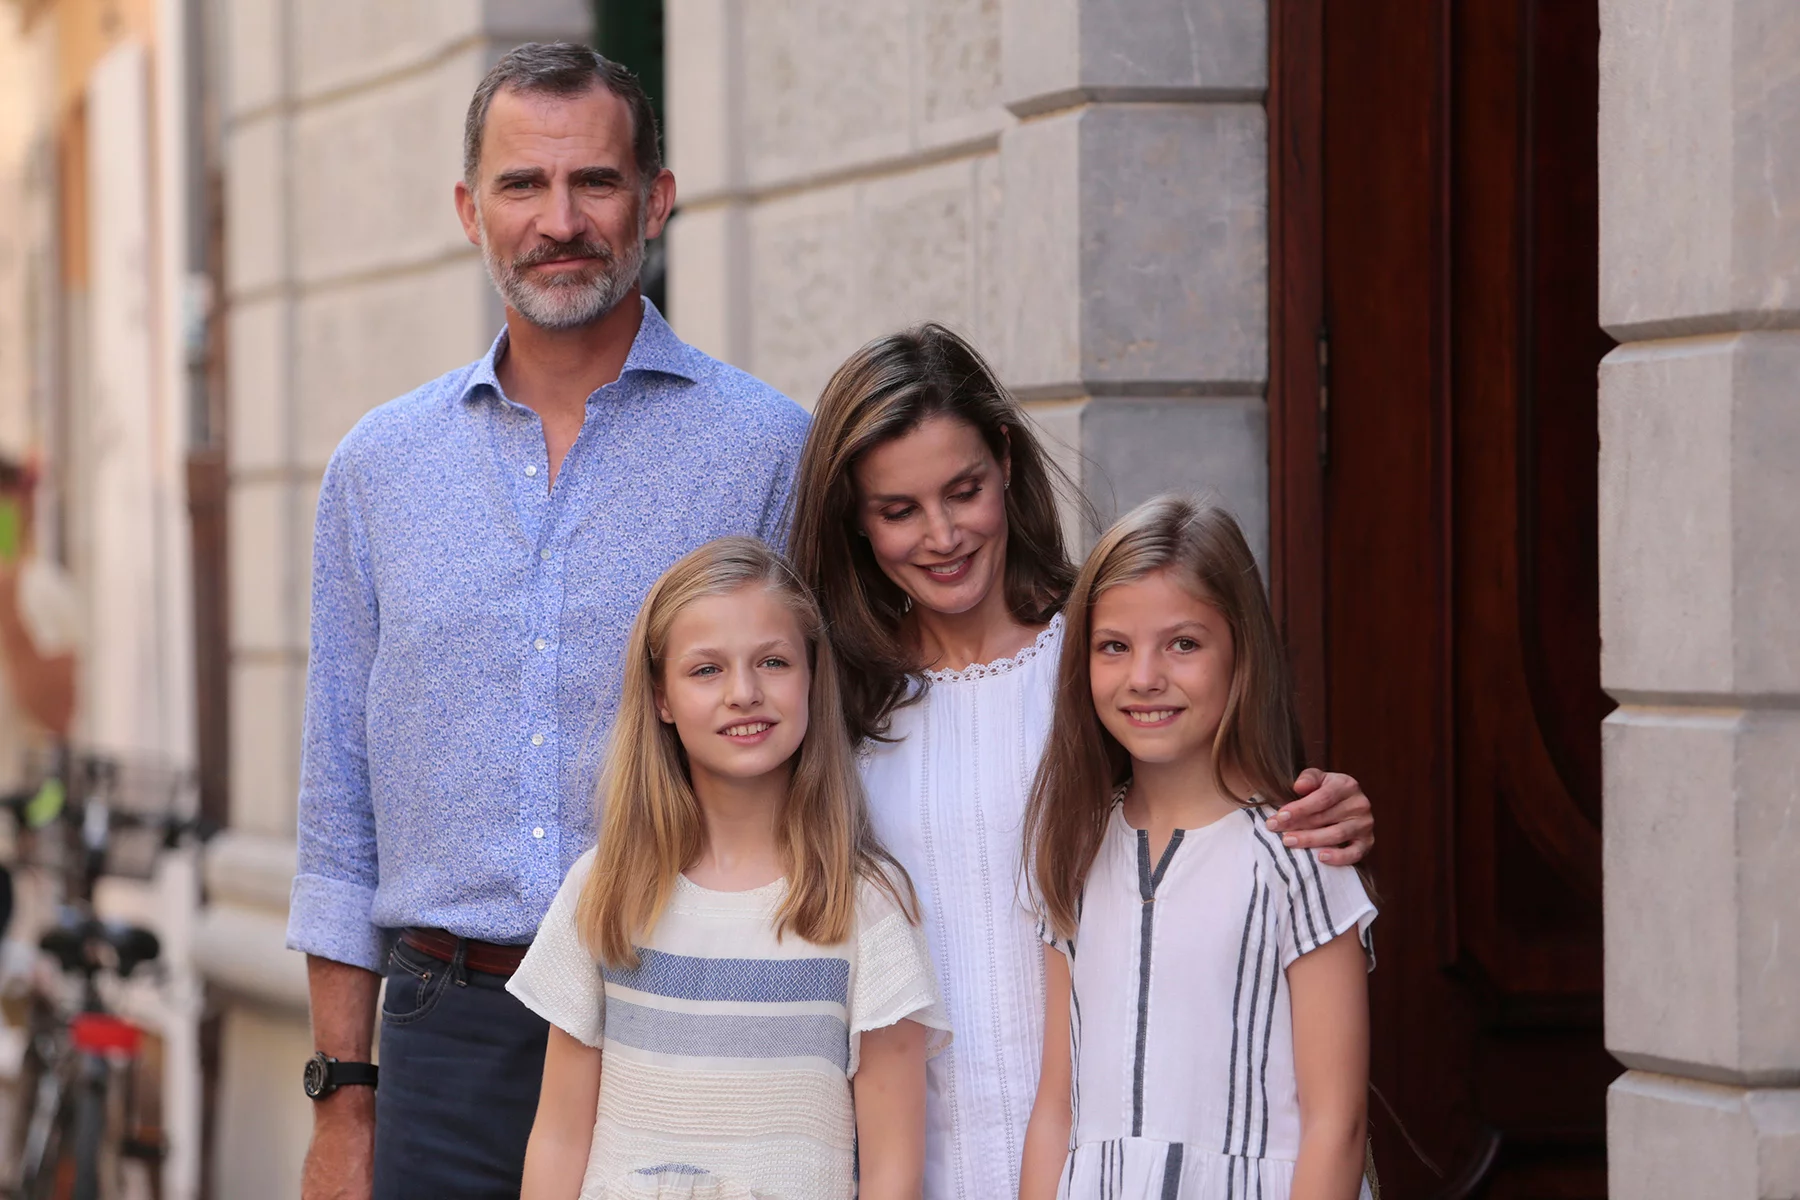 Spanish royal family posing for a photograph